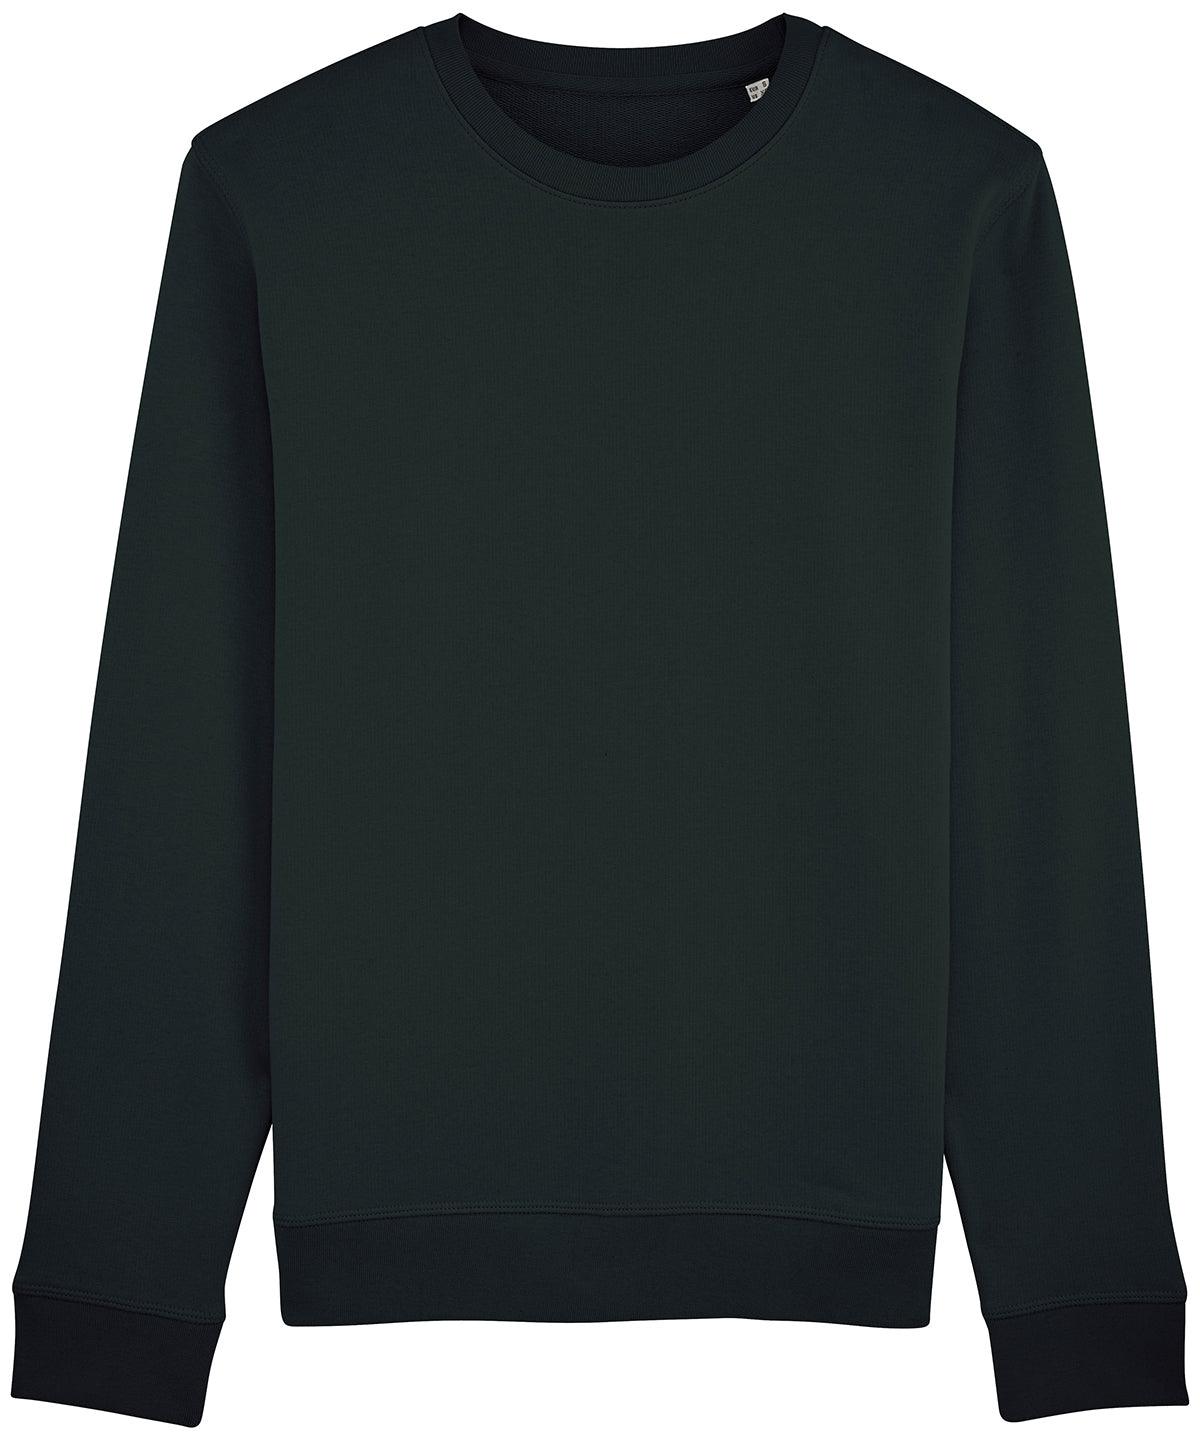 Black* - Unisex Rise essential crew neck sweatshirt (STSU811) Sweatshirts Stanley/Stella Exclusives, New Colours for 2021, Organic & Conscious, Plus Sizes, Raladeal - High Stock, Recycled, Sweatshirts Schoolwear Centres